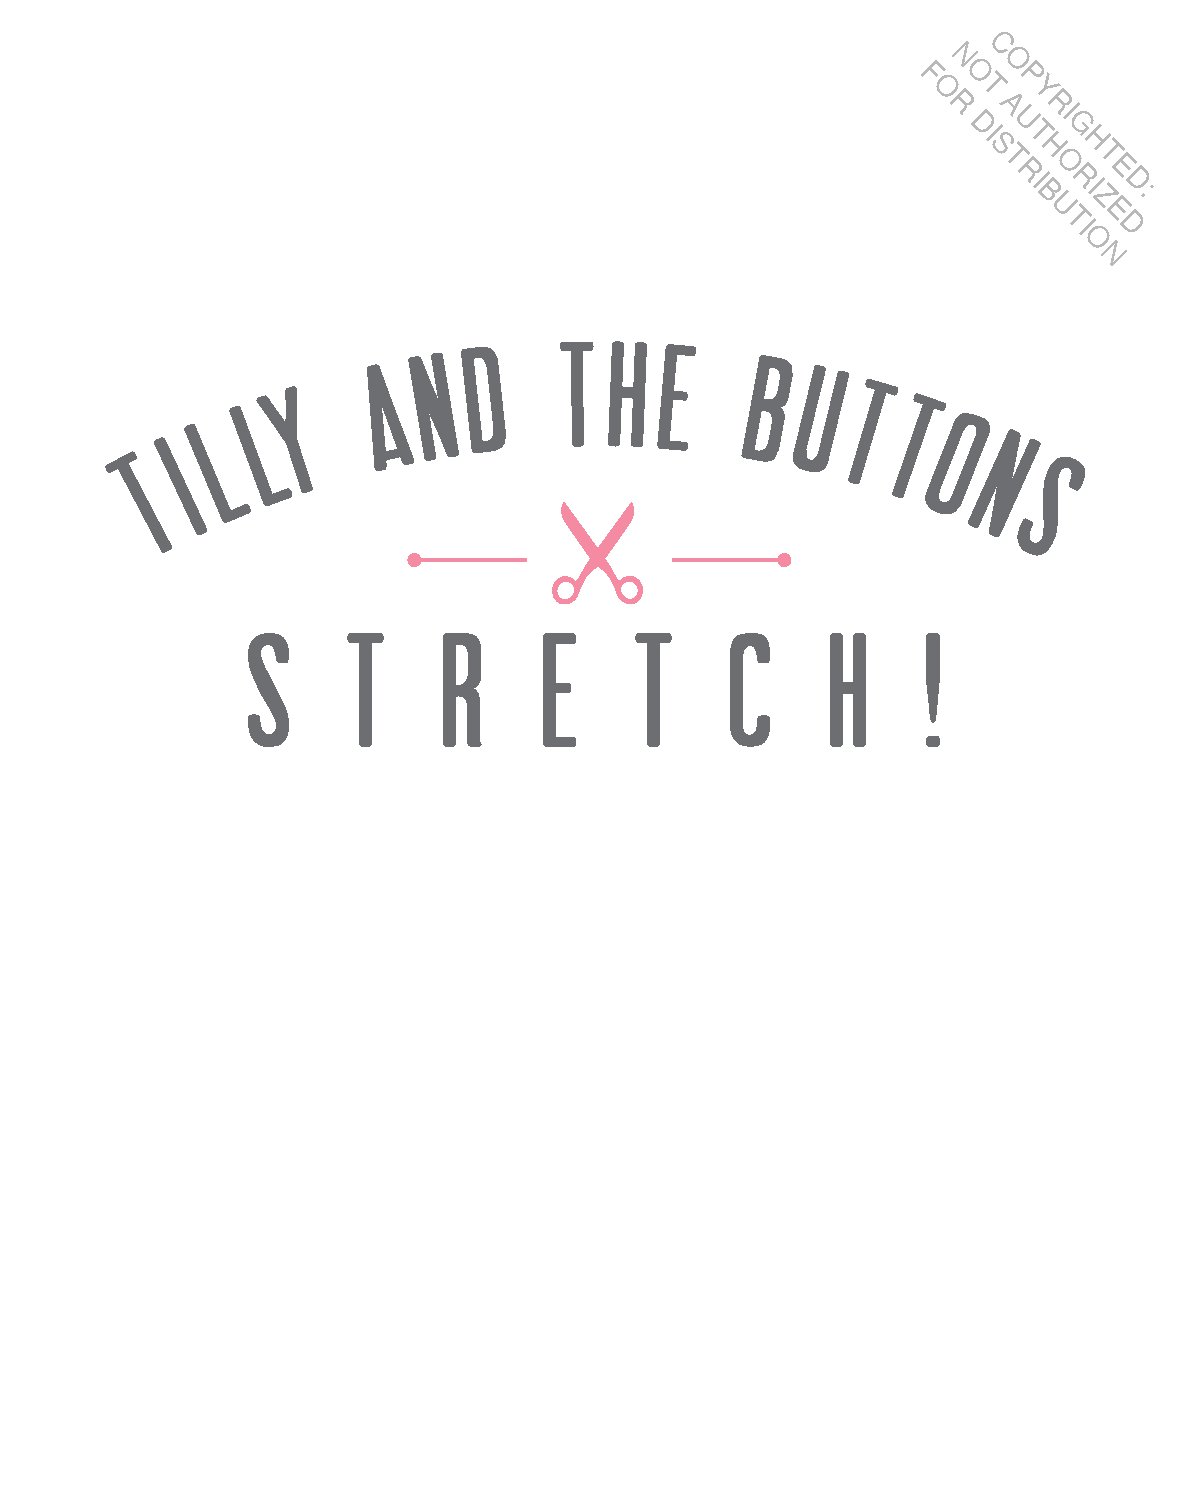 Tilly and the Buttons: Stretch!